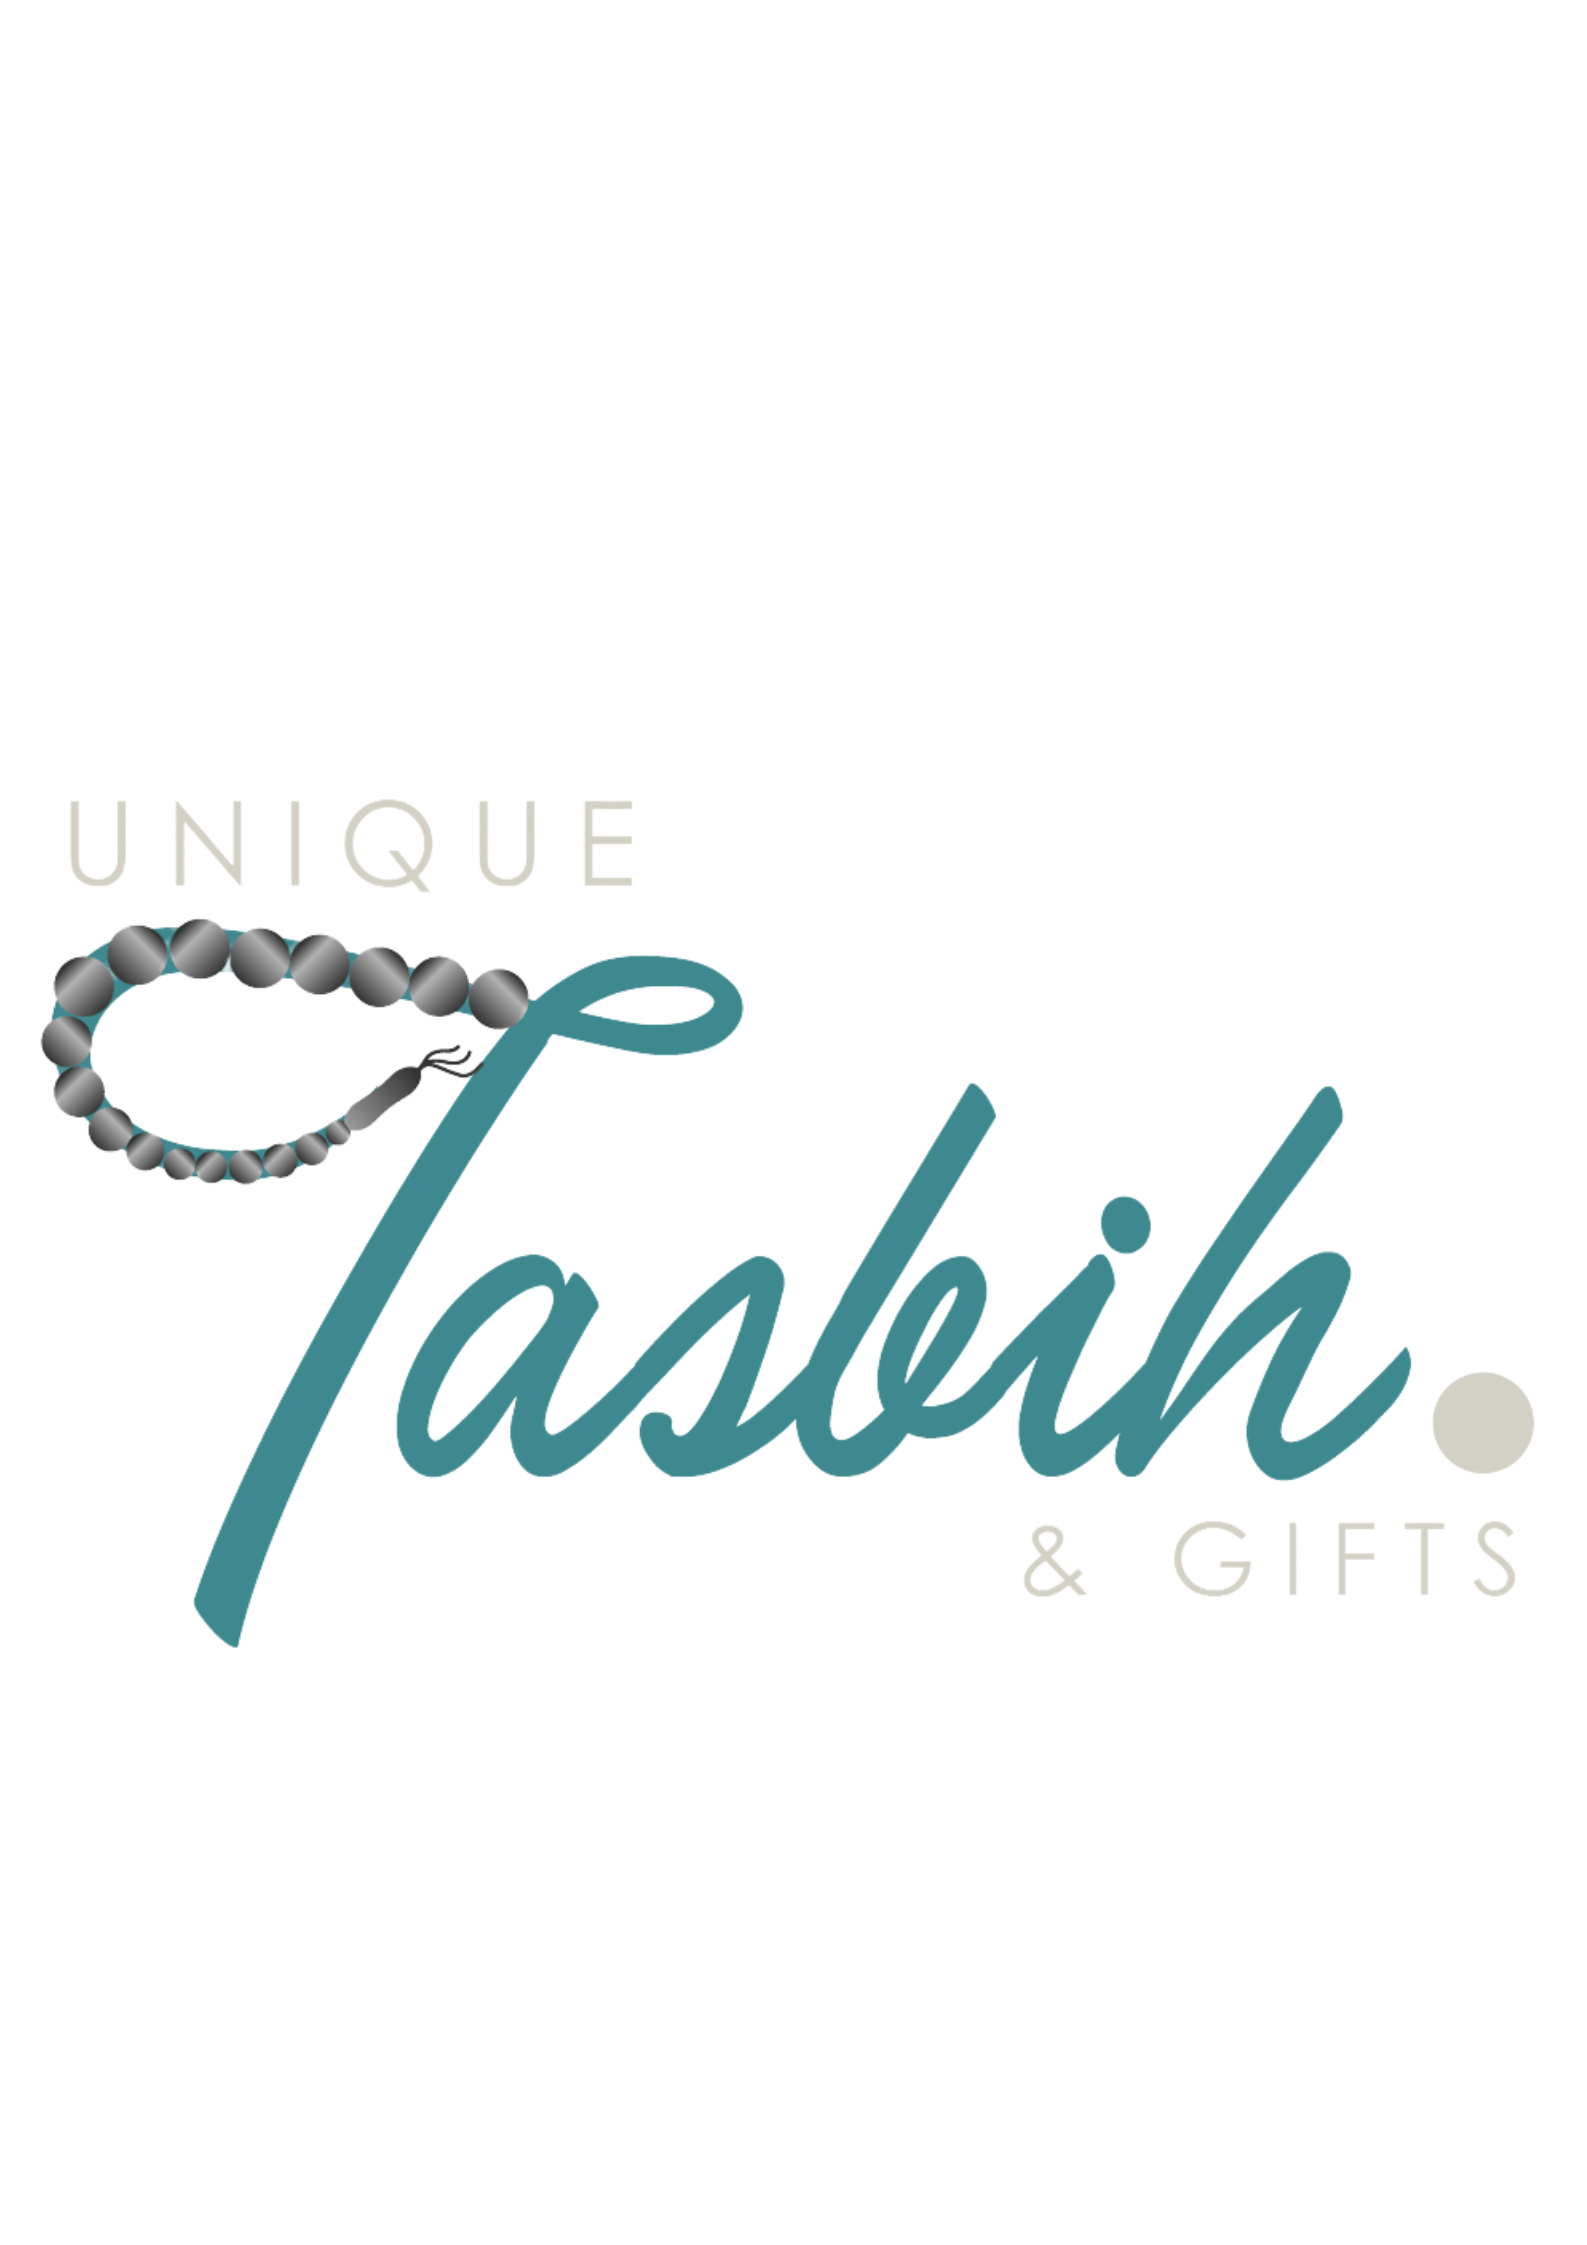 Unique Tasbihs & Gifts